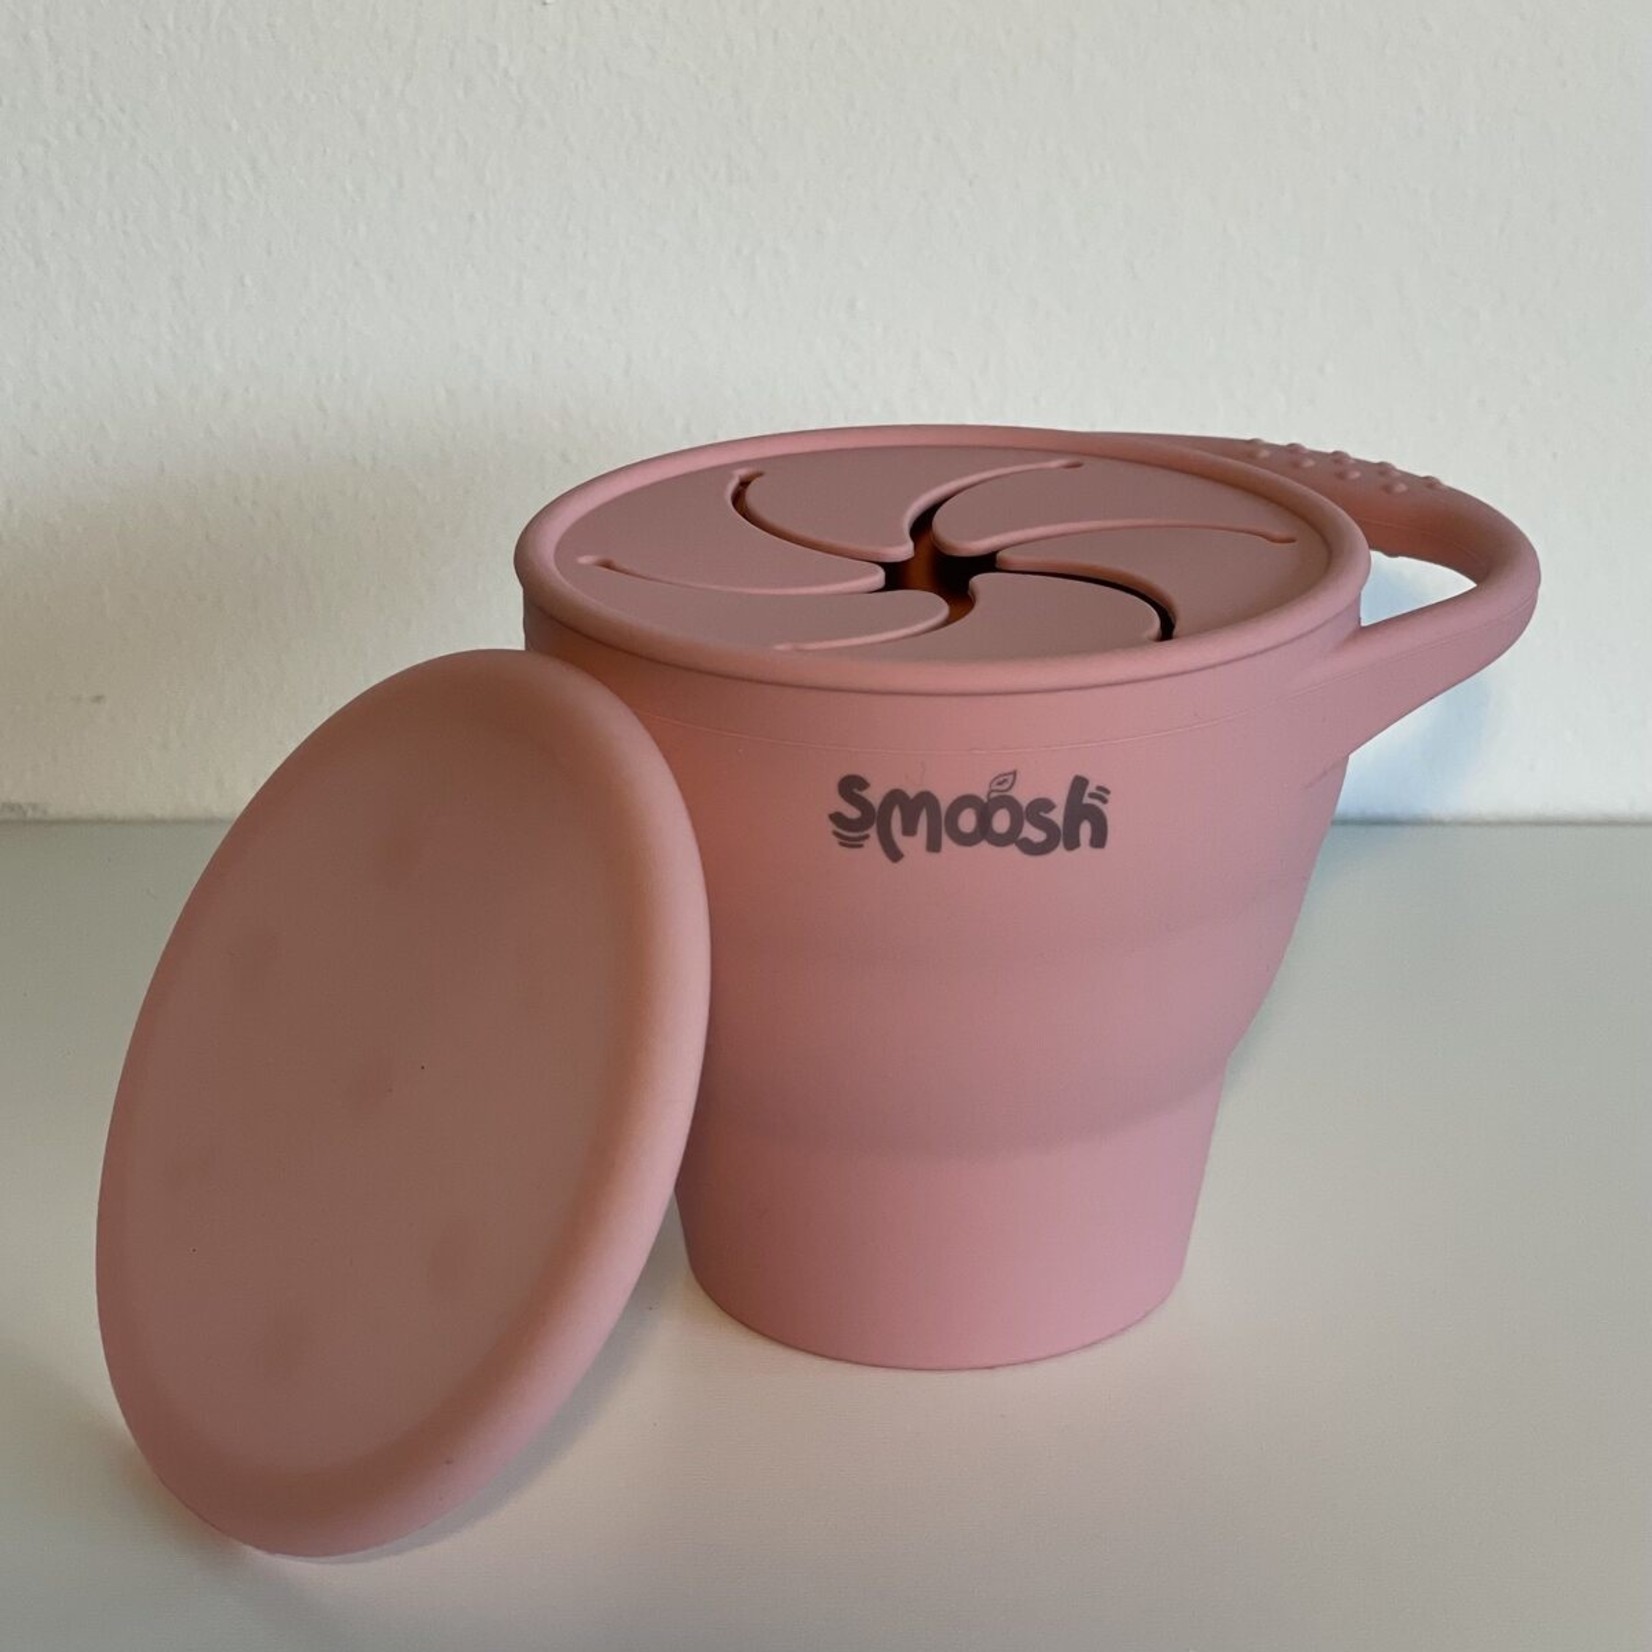 Brands4kids Smoosh Collapsible Snack Cup with Lid